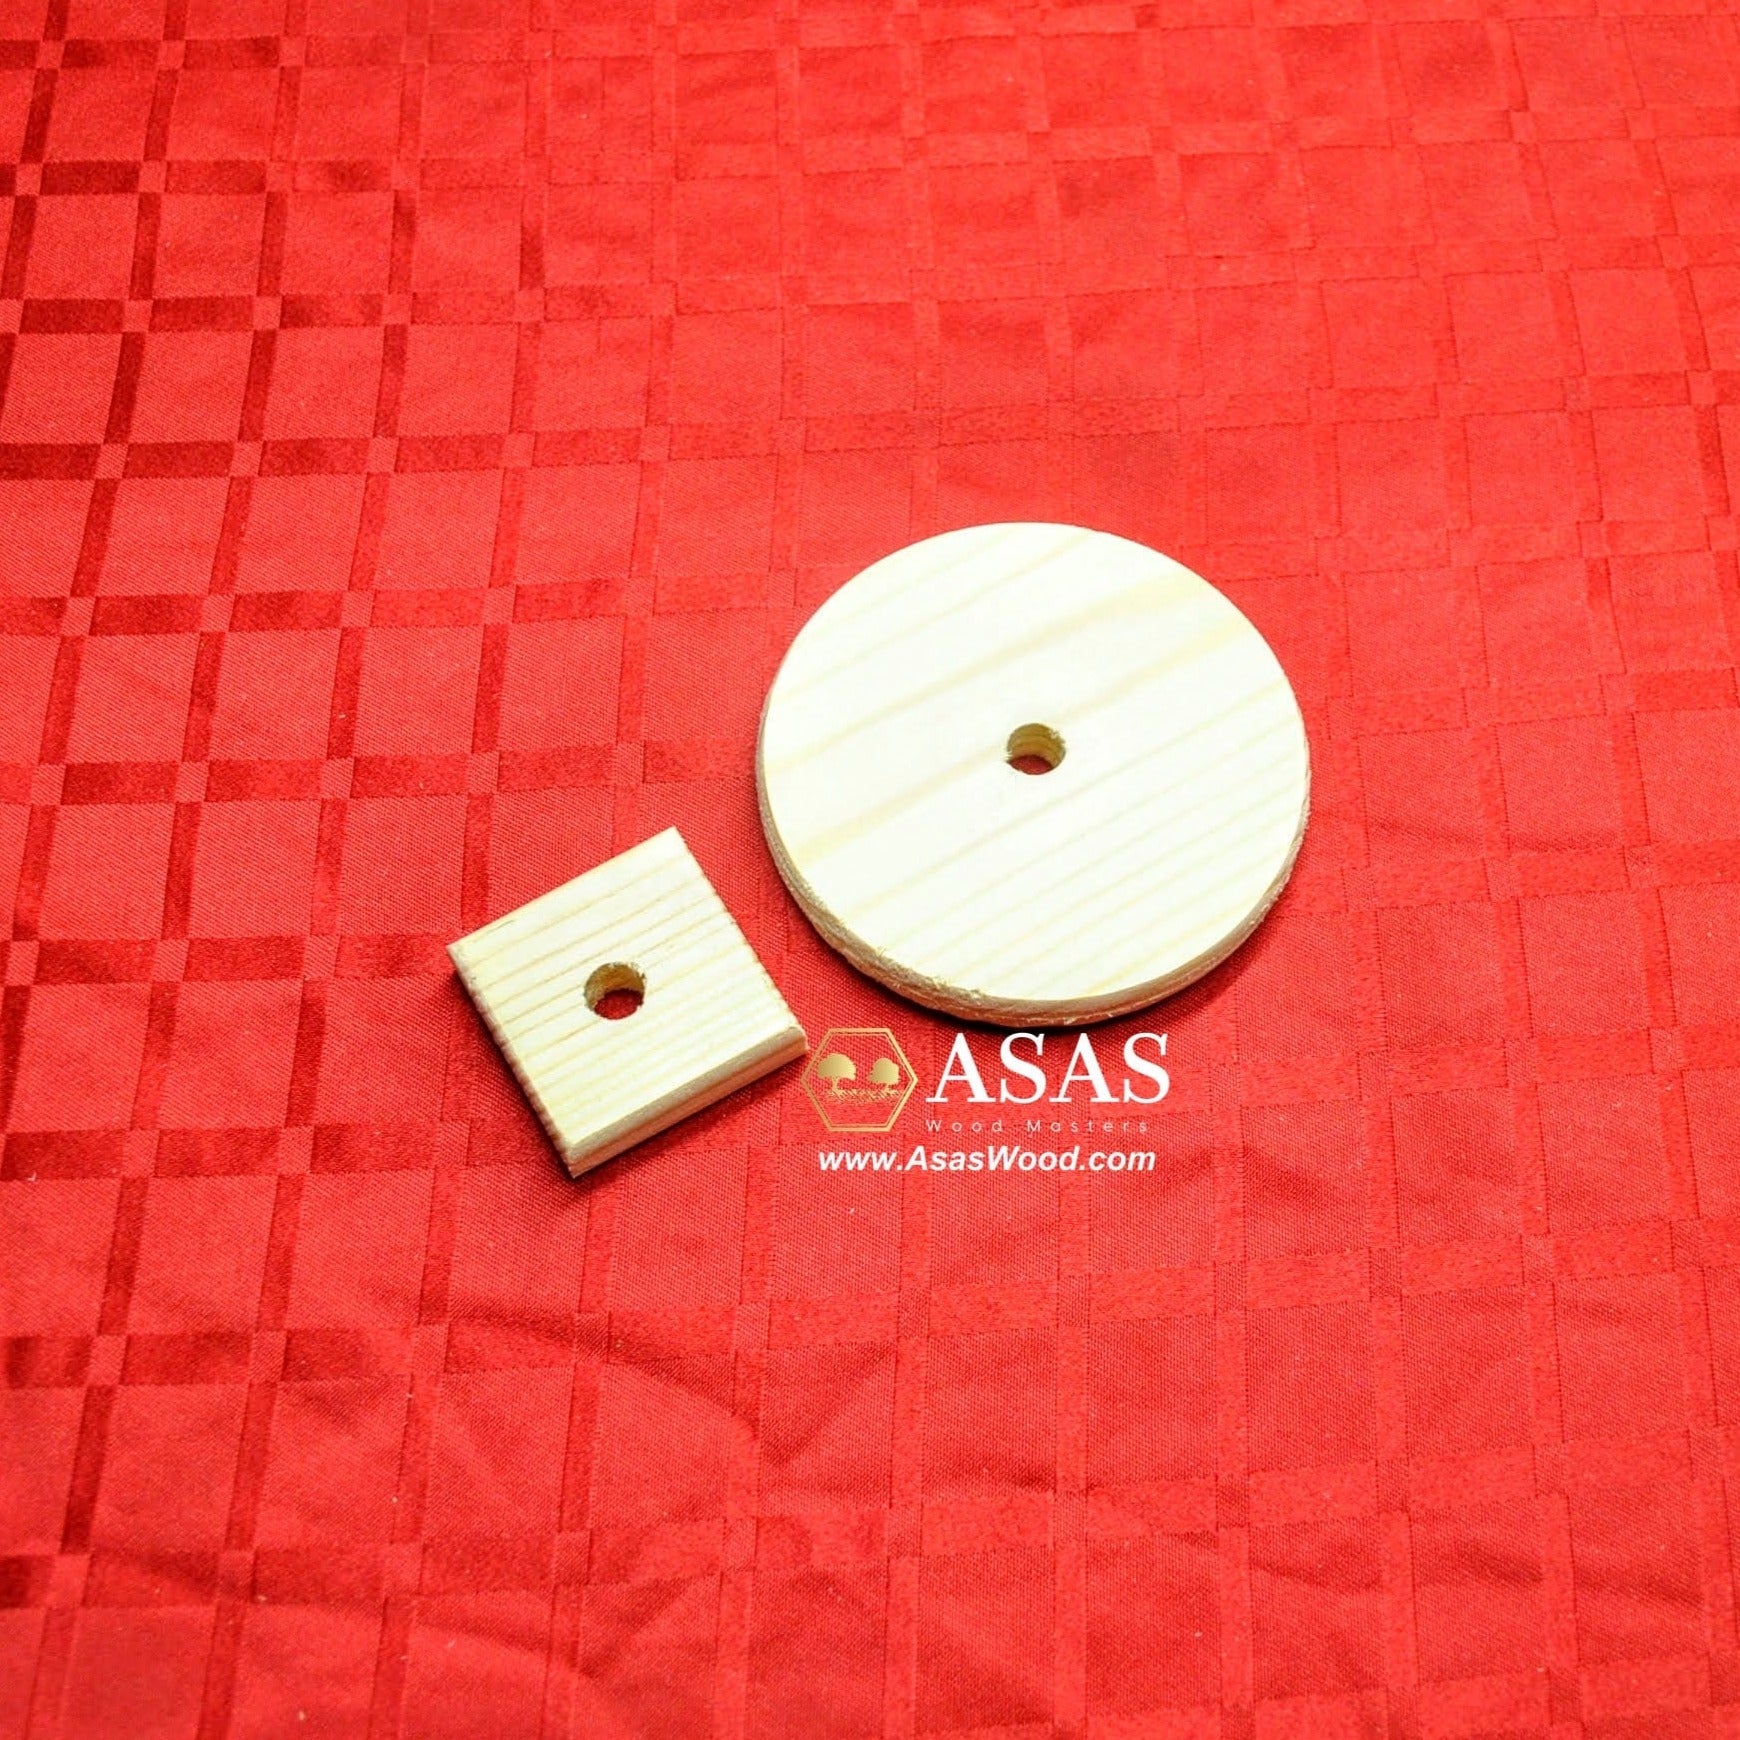 Wooden parts for Small pet Toys DIY  on red carpet